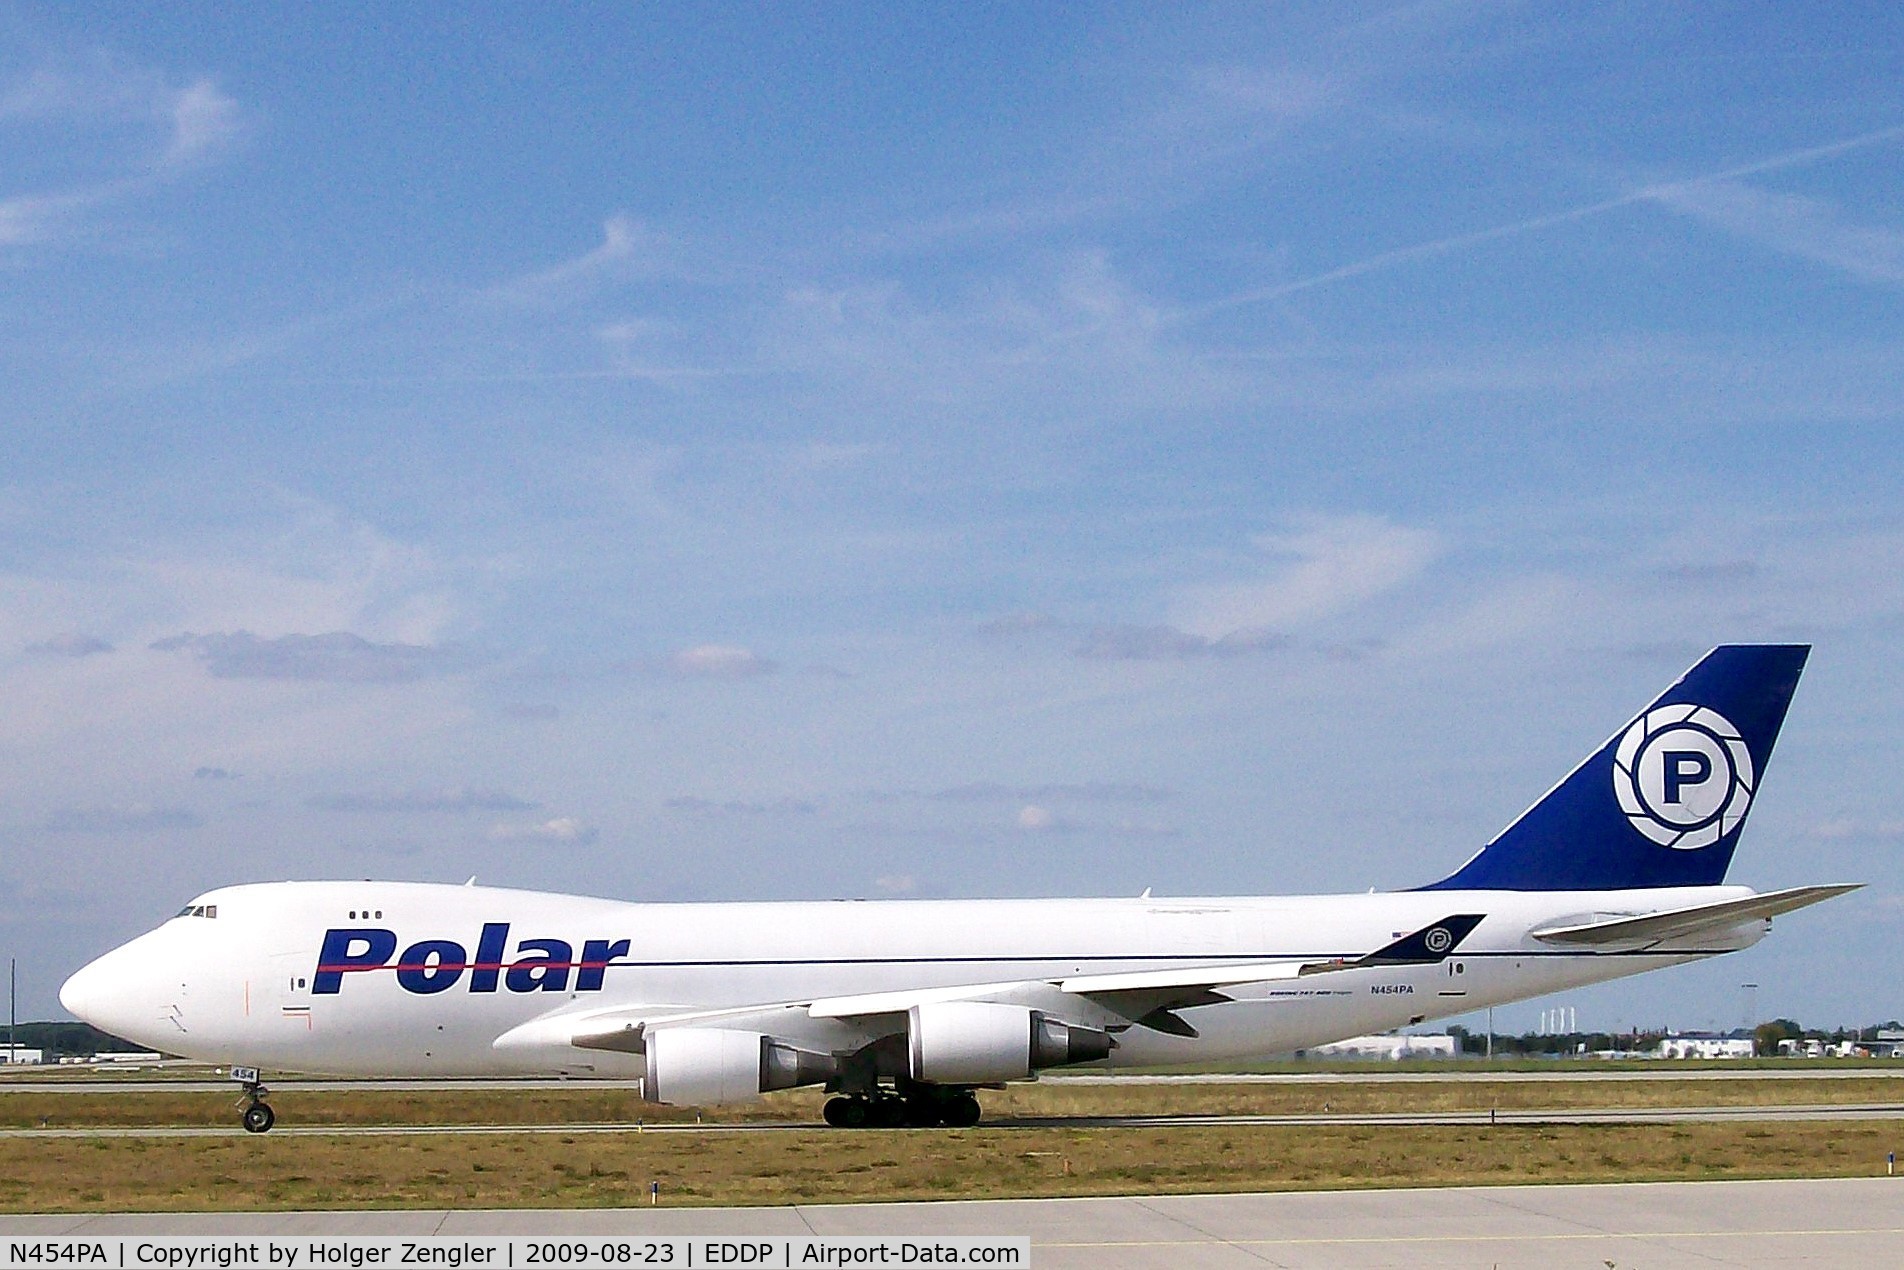 N454PA, 2002 Boeing 747-46NF C/N 30812, On the way to its sunday afternoon ride to western skies